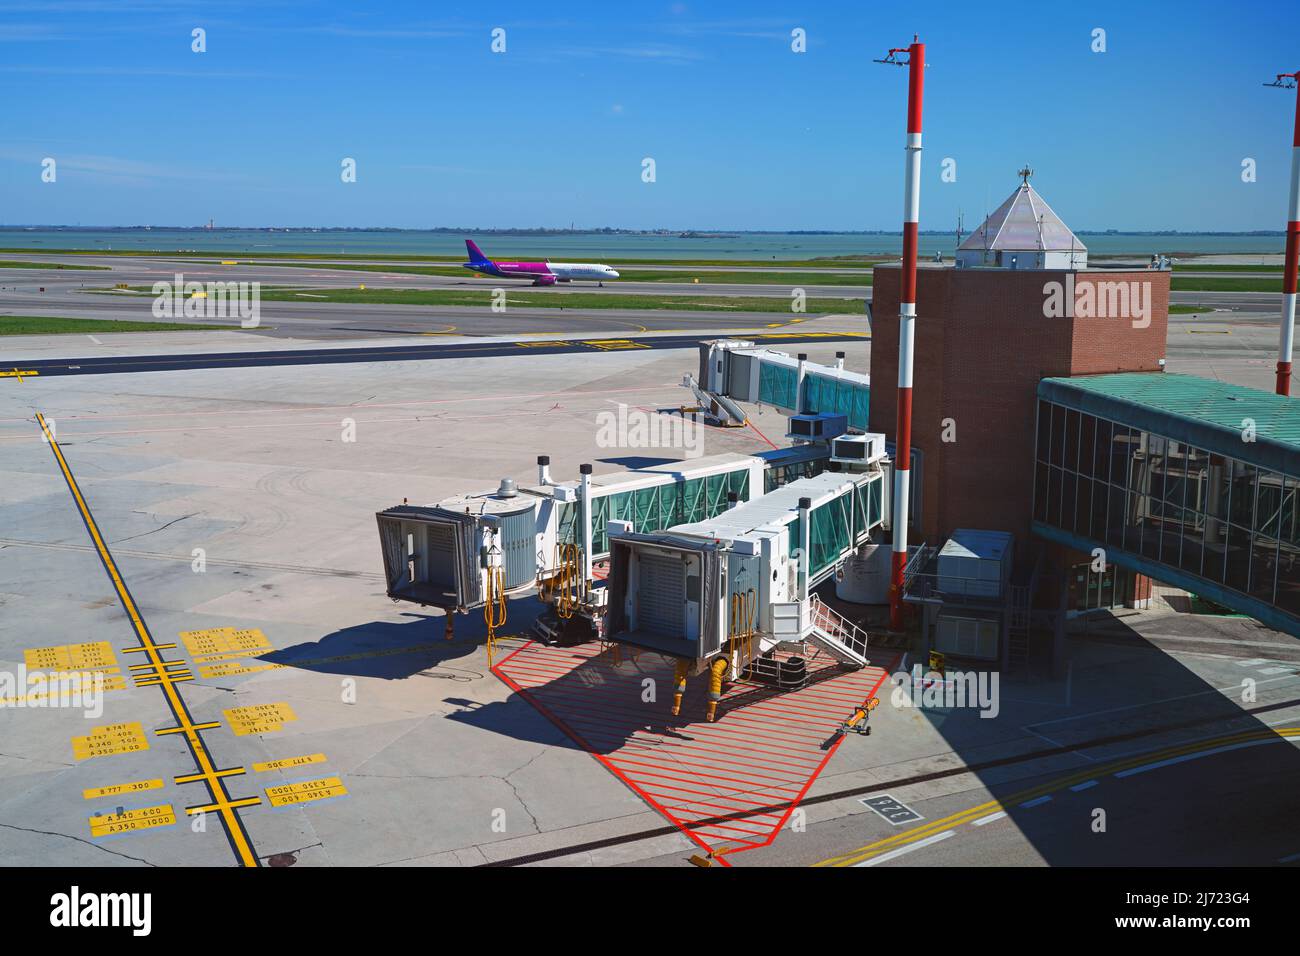 VENICE, ITALY -17 APR 2022- View of an airplane from Hungarian ultra low-cost airline Wizz Air (W6) at the Venice Marco Polo Airport (VCE), located on Stock Photo